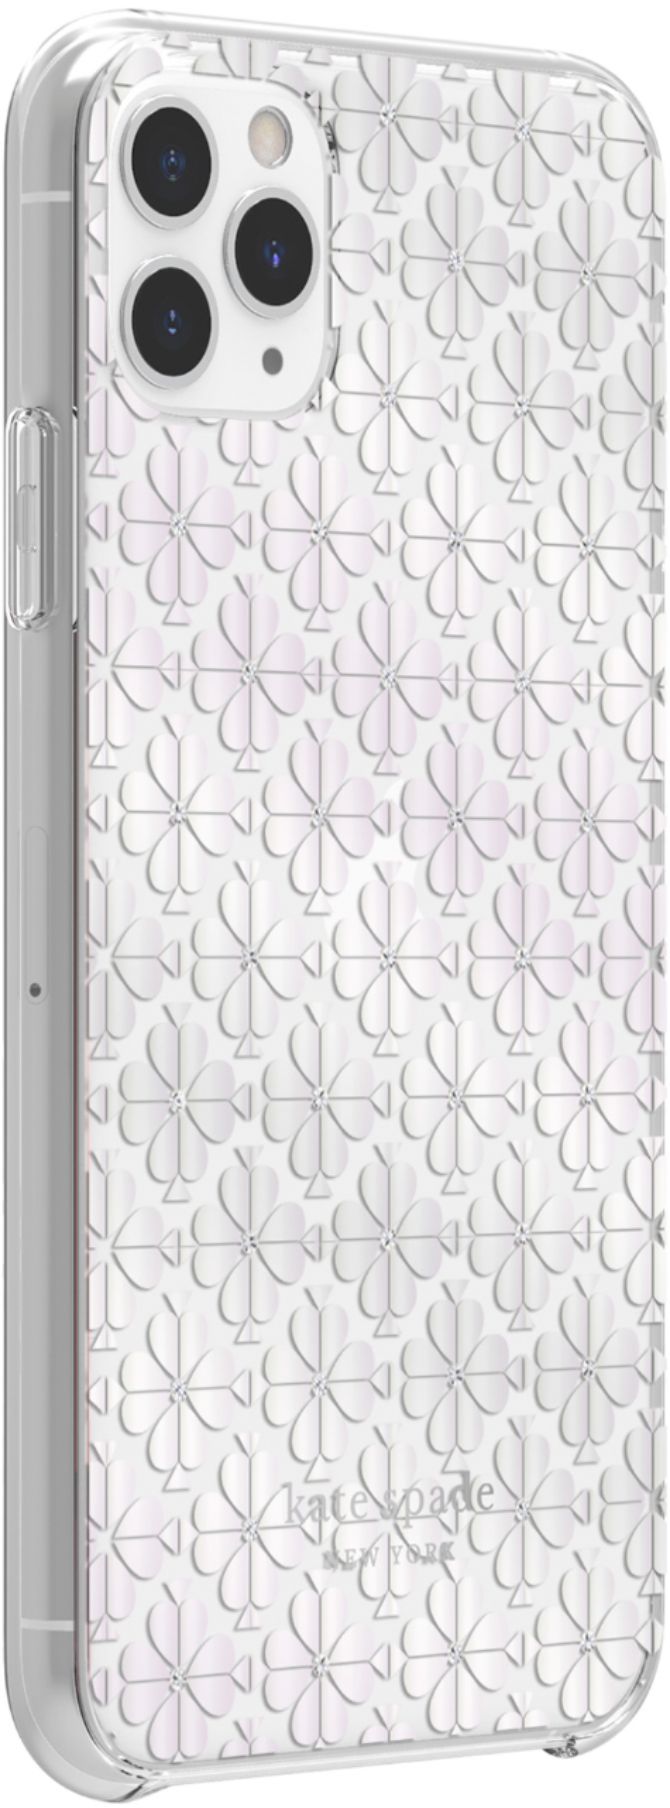 Angle View: kate spade new york - Protective Hard Shell Case for Apple® iPhone® 11 Pro Max - Crystal Gems/Spade Flower Pearl Foil